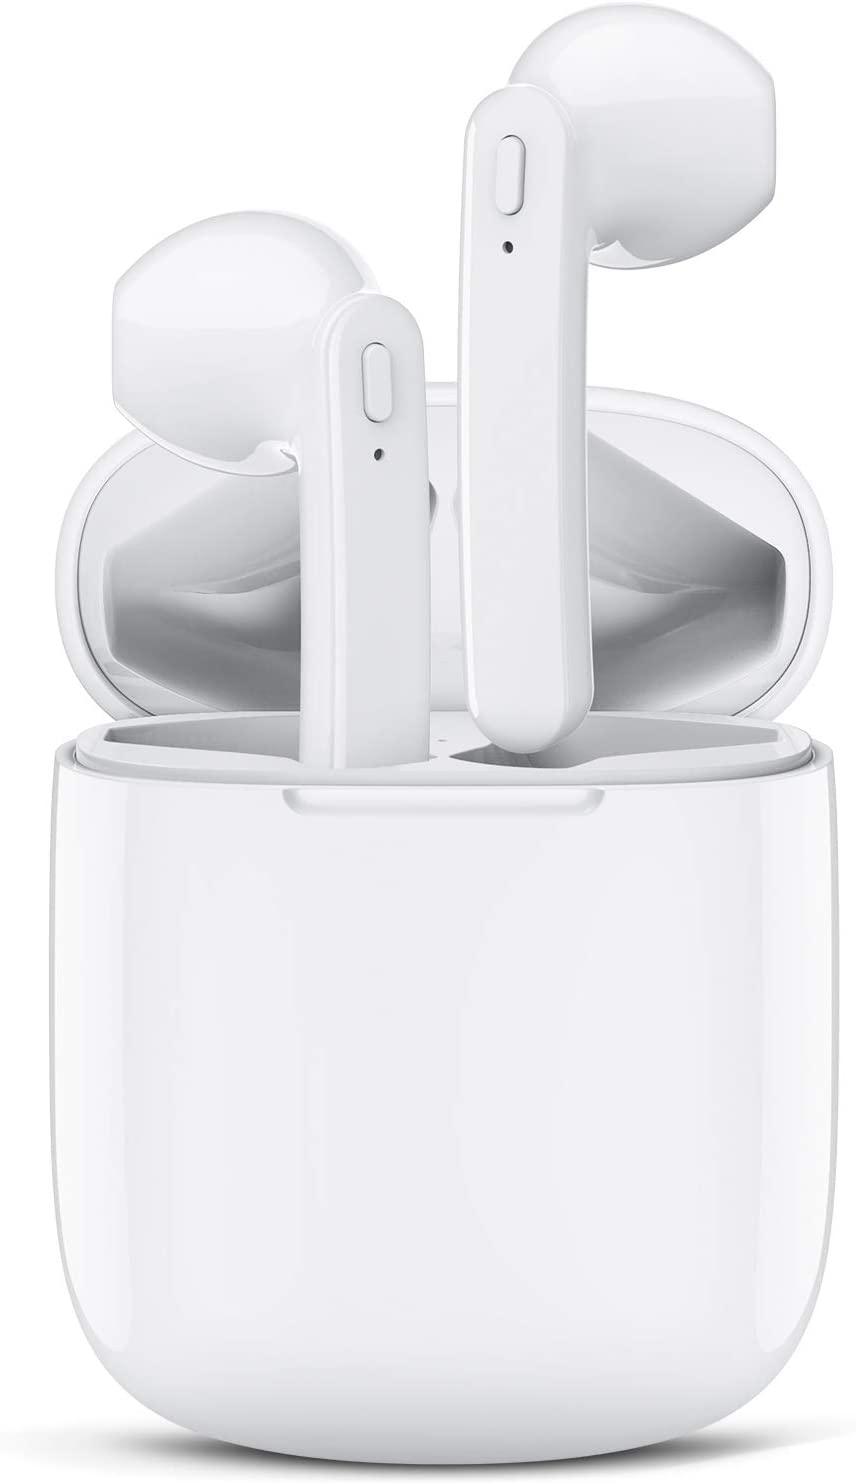 Auriculares Apple iPhone NDP 12 –